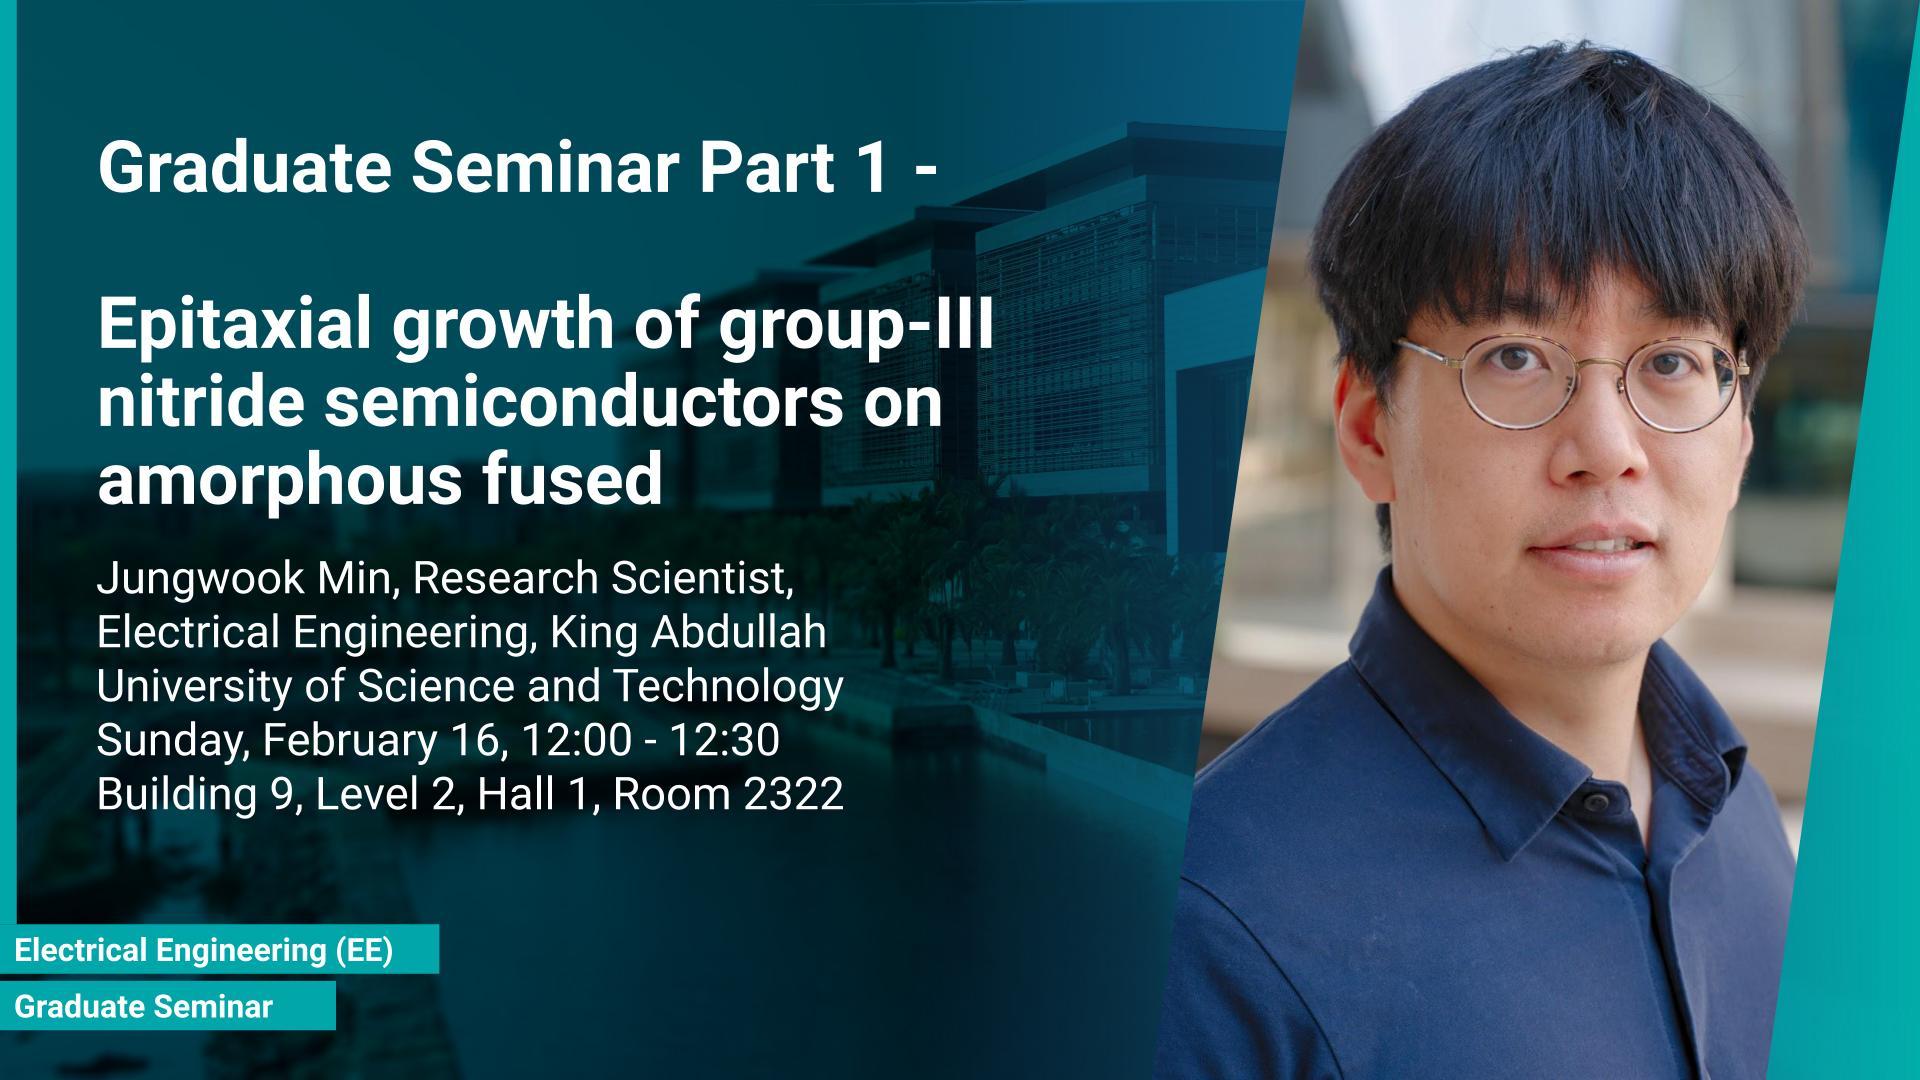 KAUST CEMSE EE Graduate Seminar part 1 Jungwook Min Epitaxial growth of group-III nitride semiconductors on amorphous fused